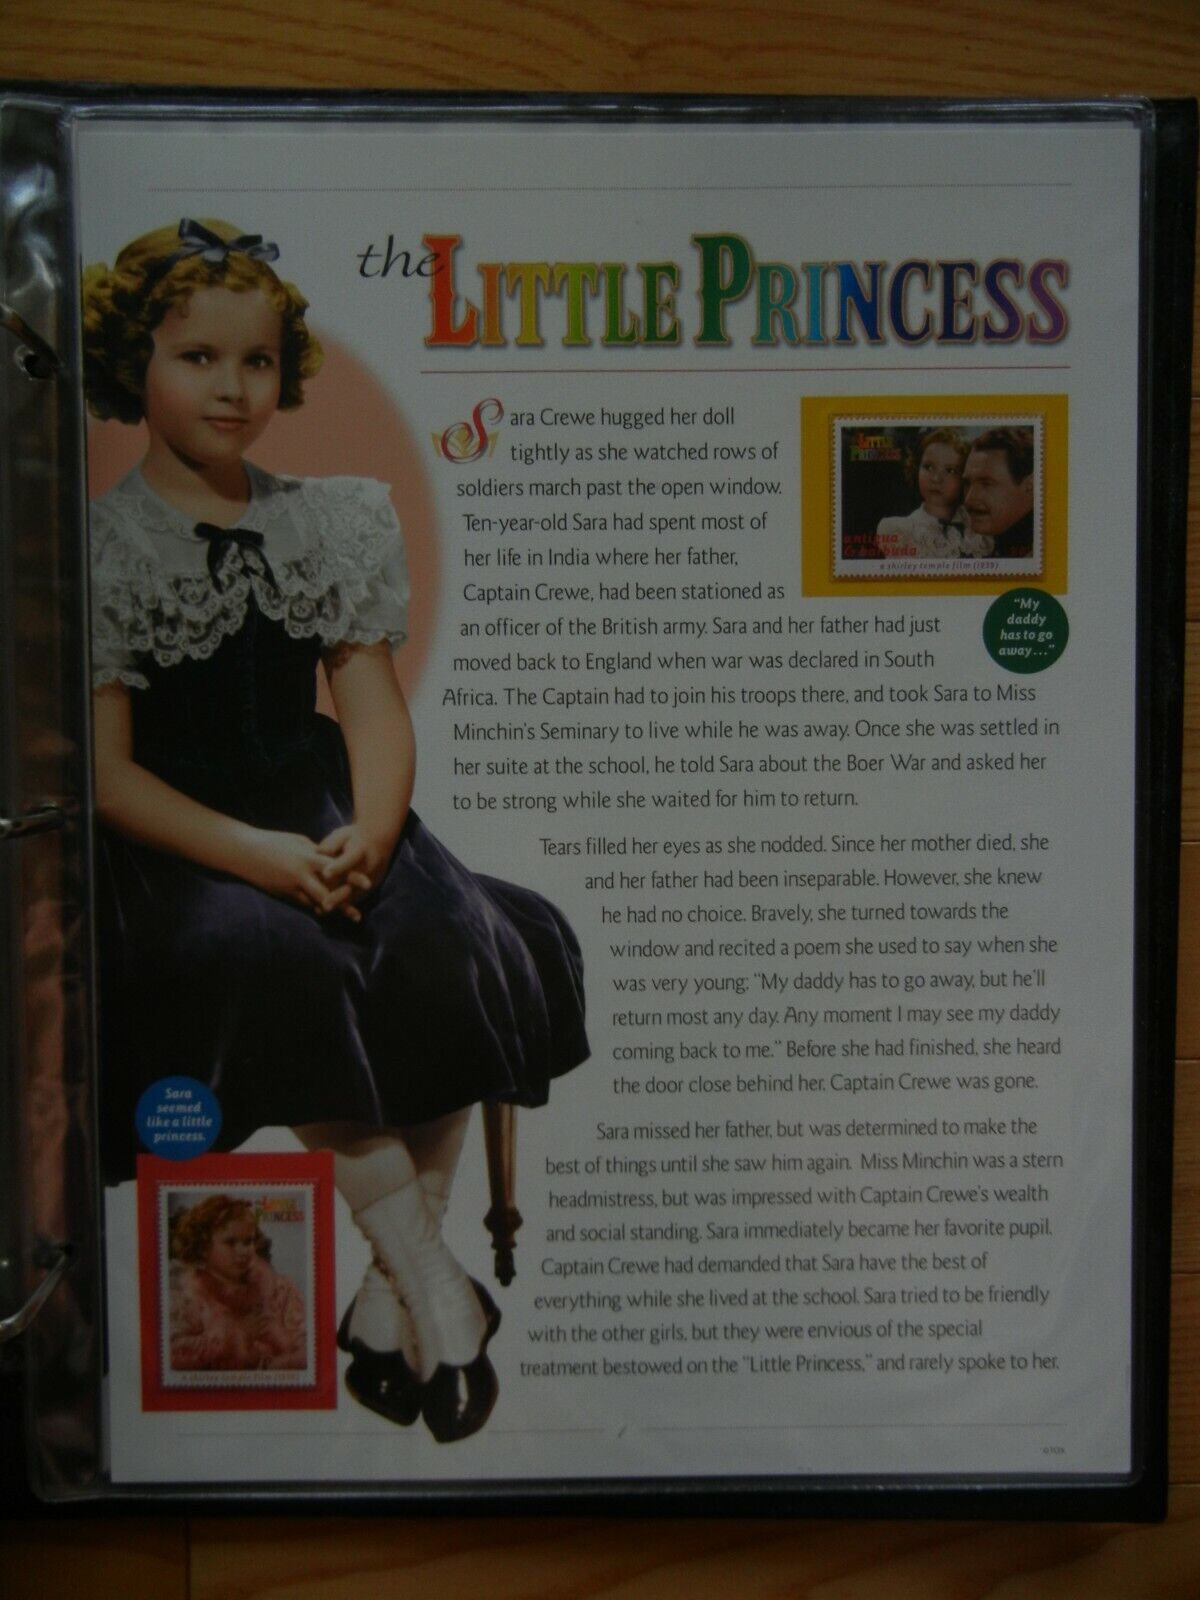 Shirley Temple Collector Stamp Panels 96 pages + auto-bio book +Heidi Movie Tape Grote waarde, populariteit?